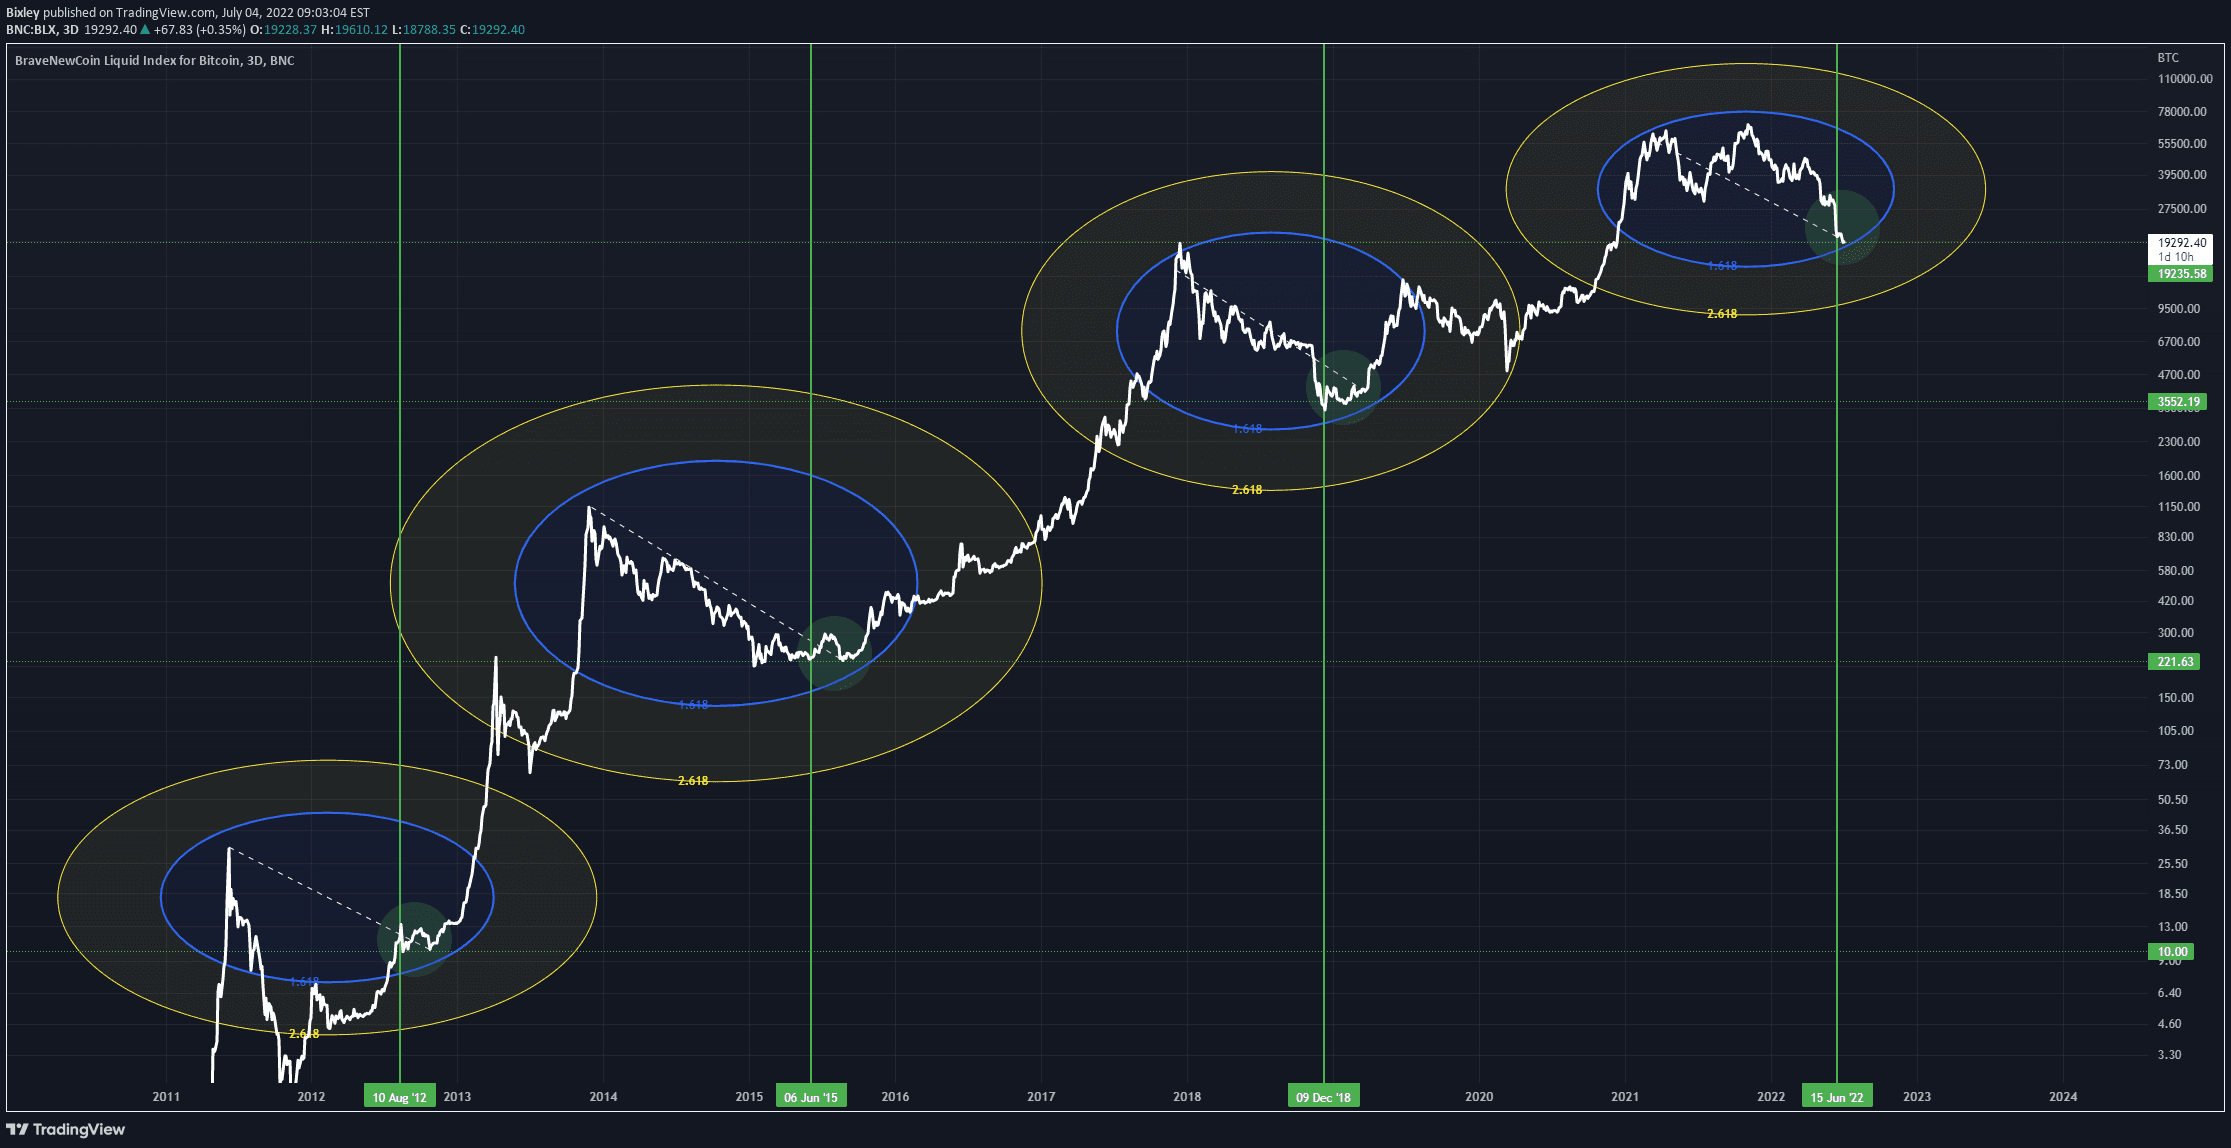 BTC - Where we are right now